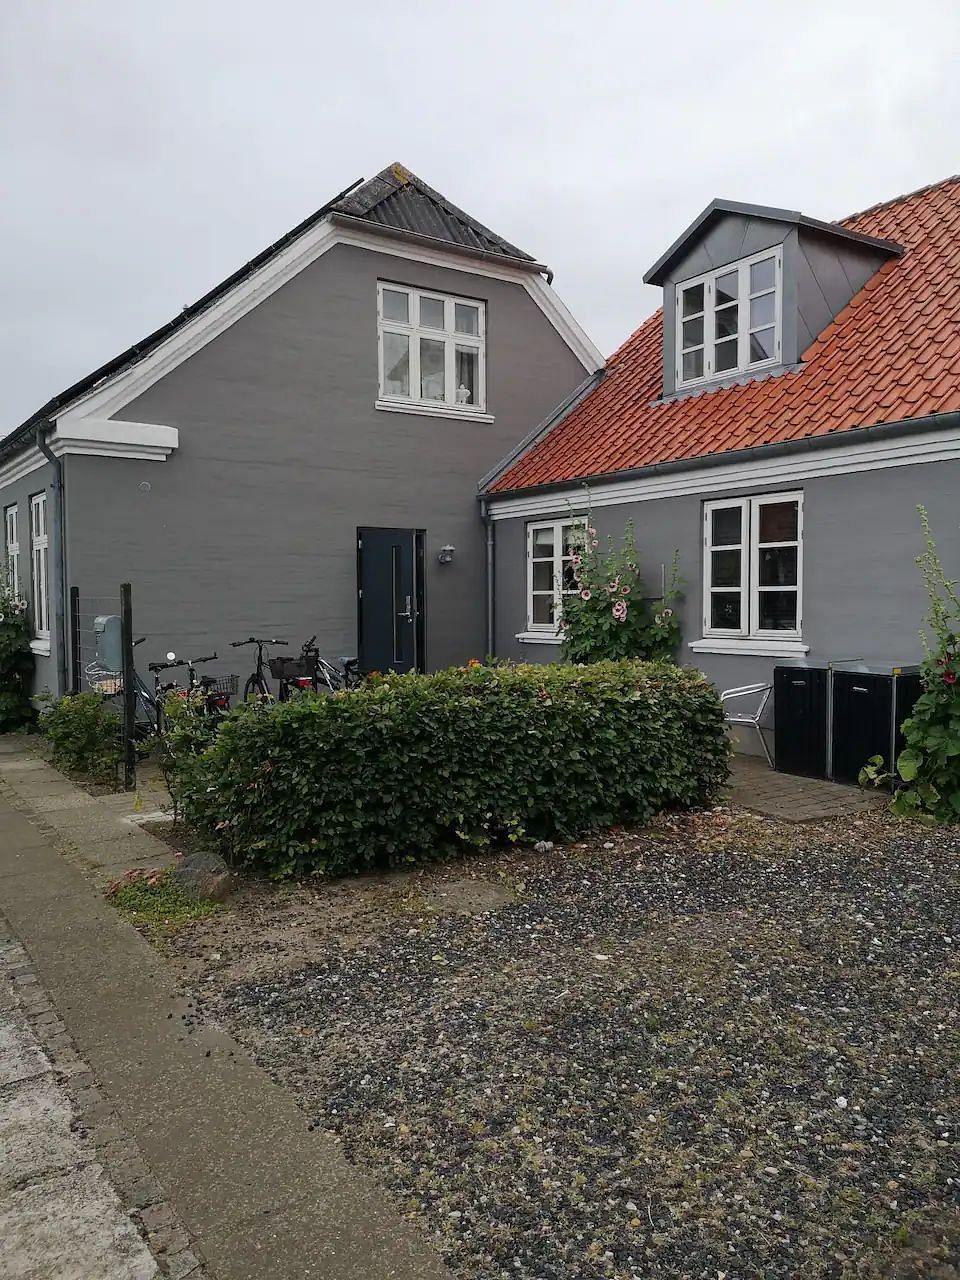 JWguest Townhouse at Ringkøbing, Danmark | Cozy townhouse close to the fjord and the centre | Jwbnb no brobnb 1